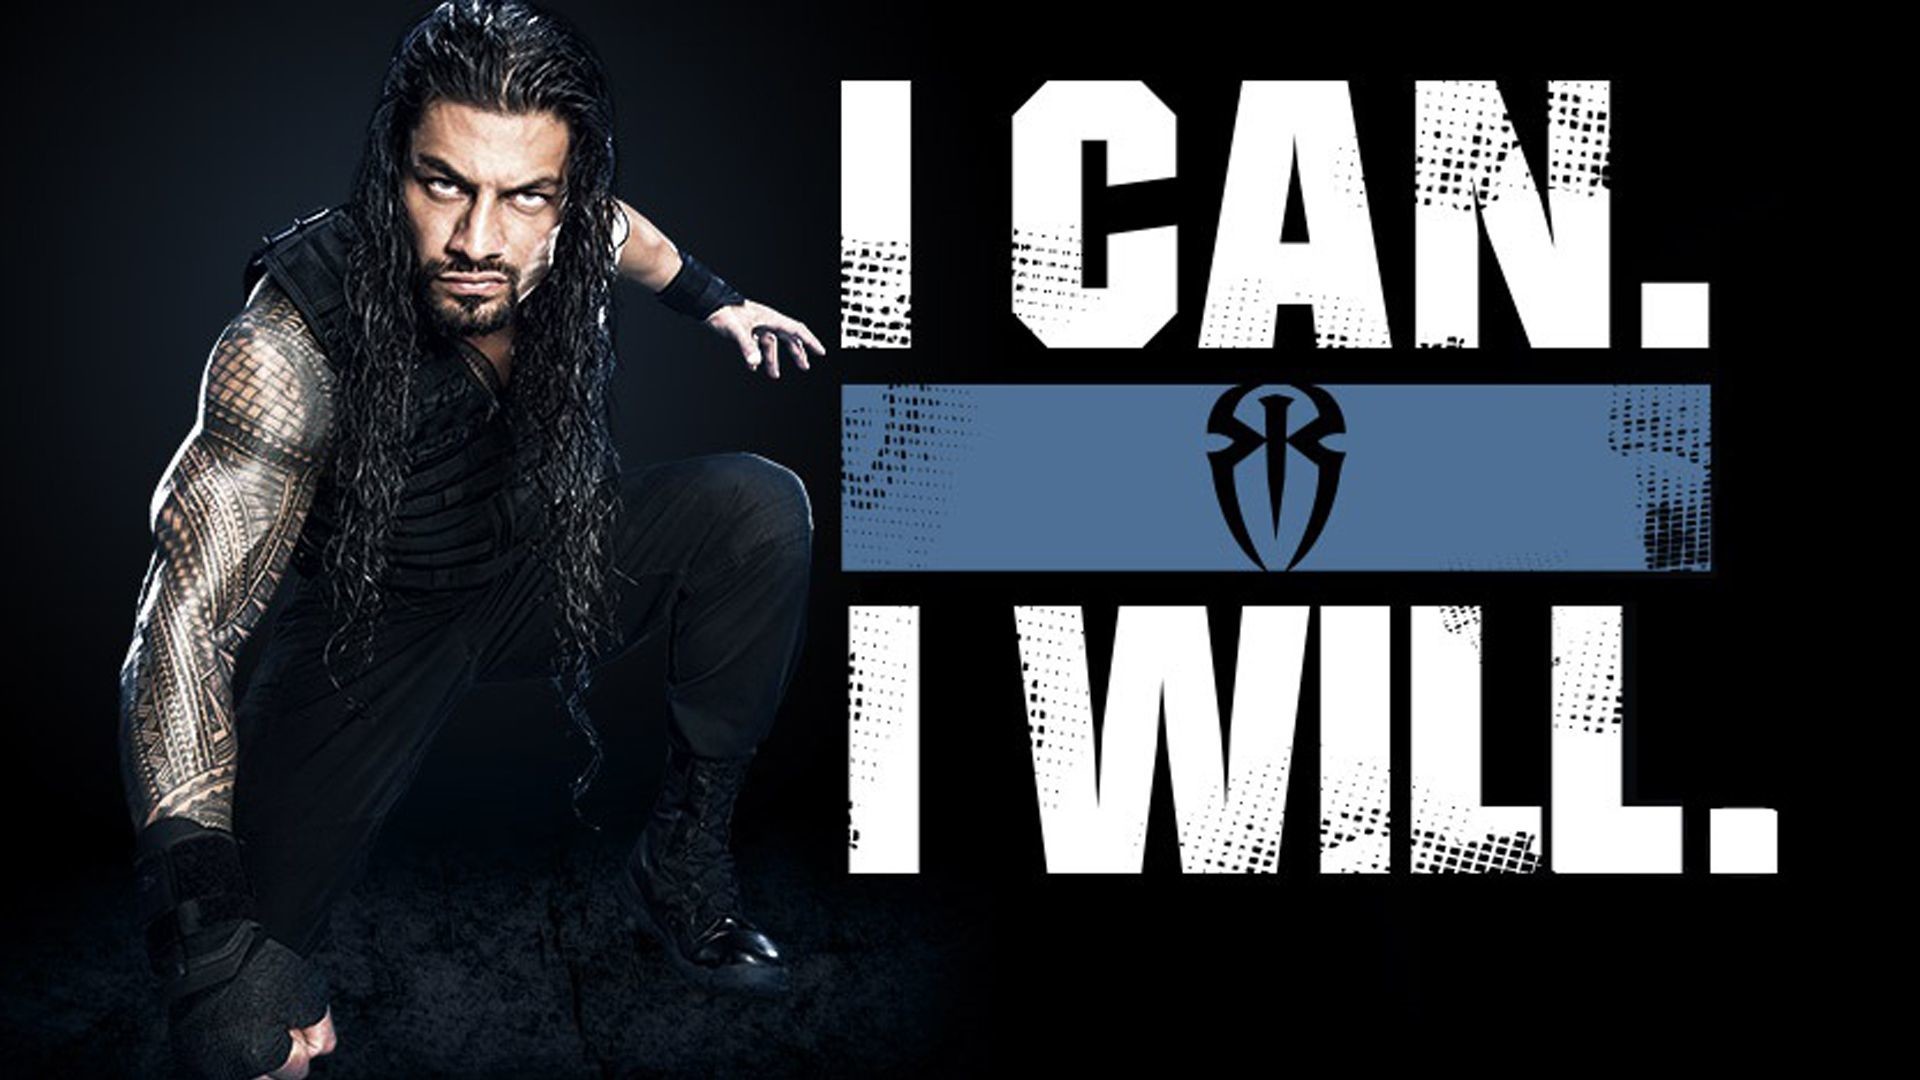 1920x1080 Wwe Wallpapers, HD Widescreen Wwe Wallpapers - VC-HD Quality Wallpapers